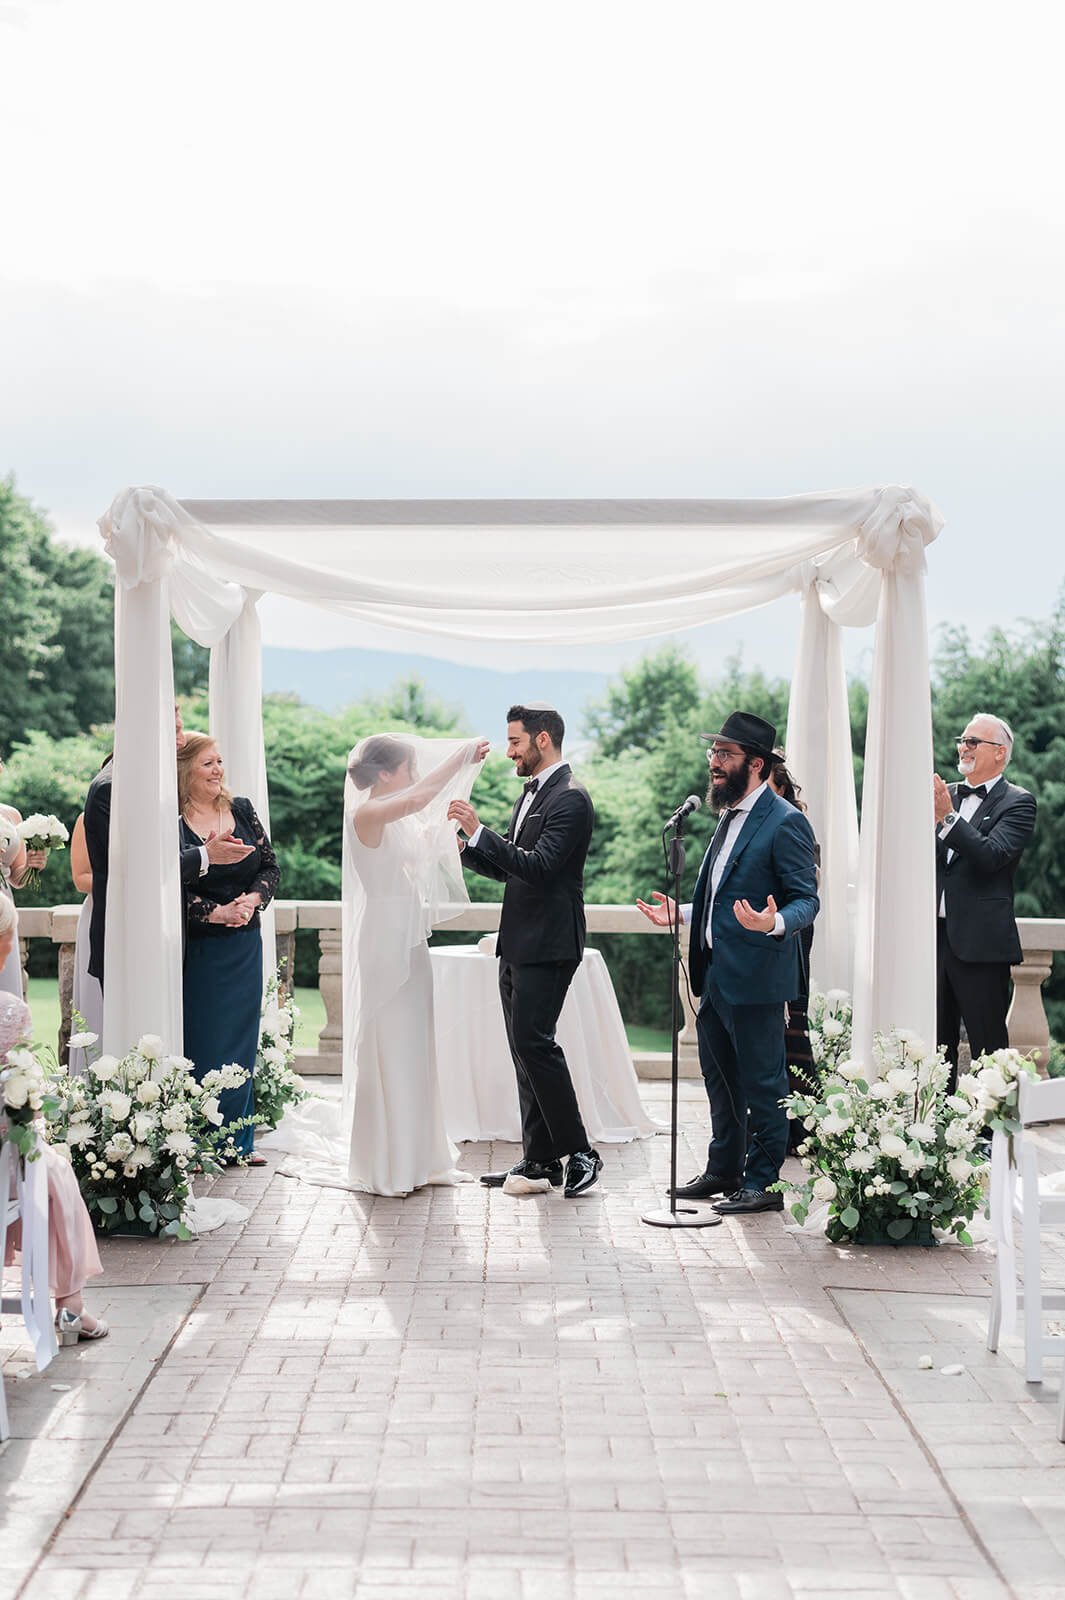 Wedding ceremony on the terrace at Tappan Hill Mansion